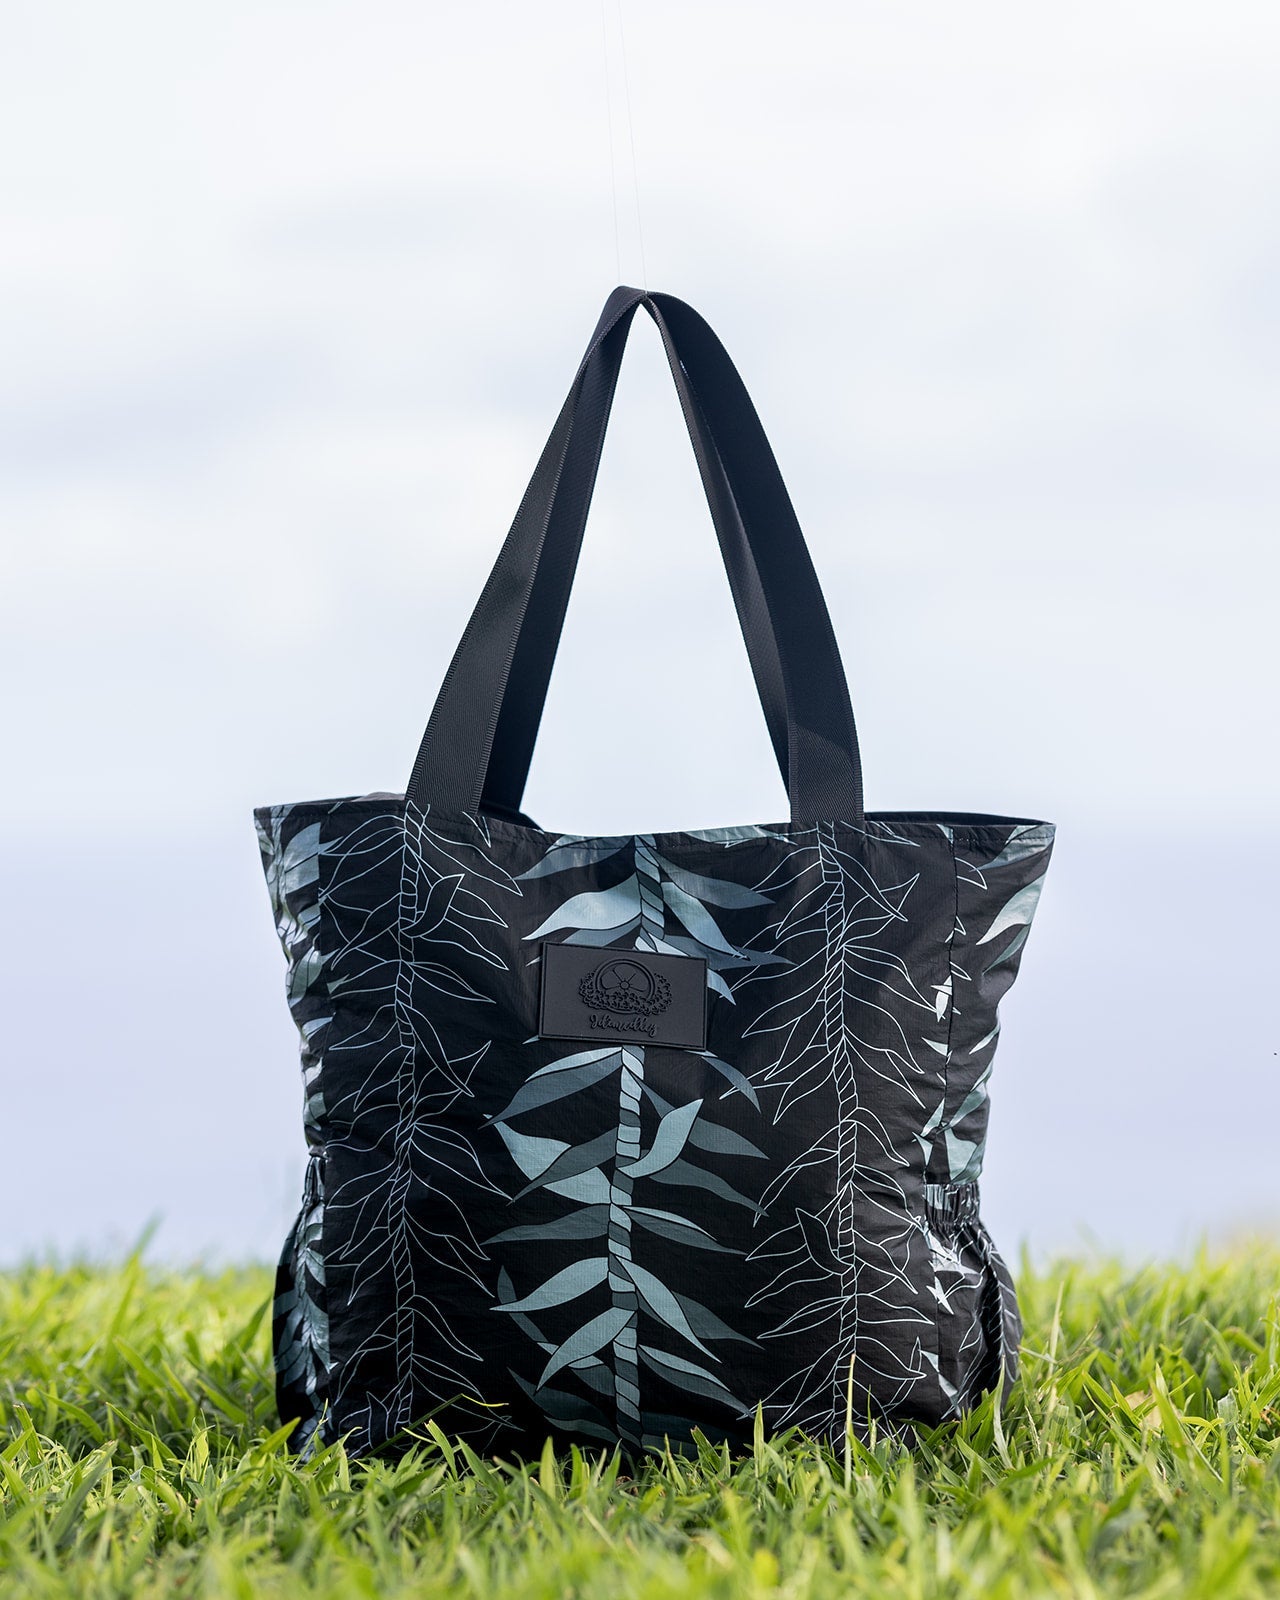 Neutral Black and gray Ti leaf tyvek tote bag in the grass.